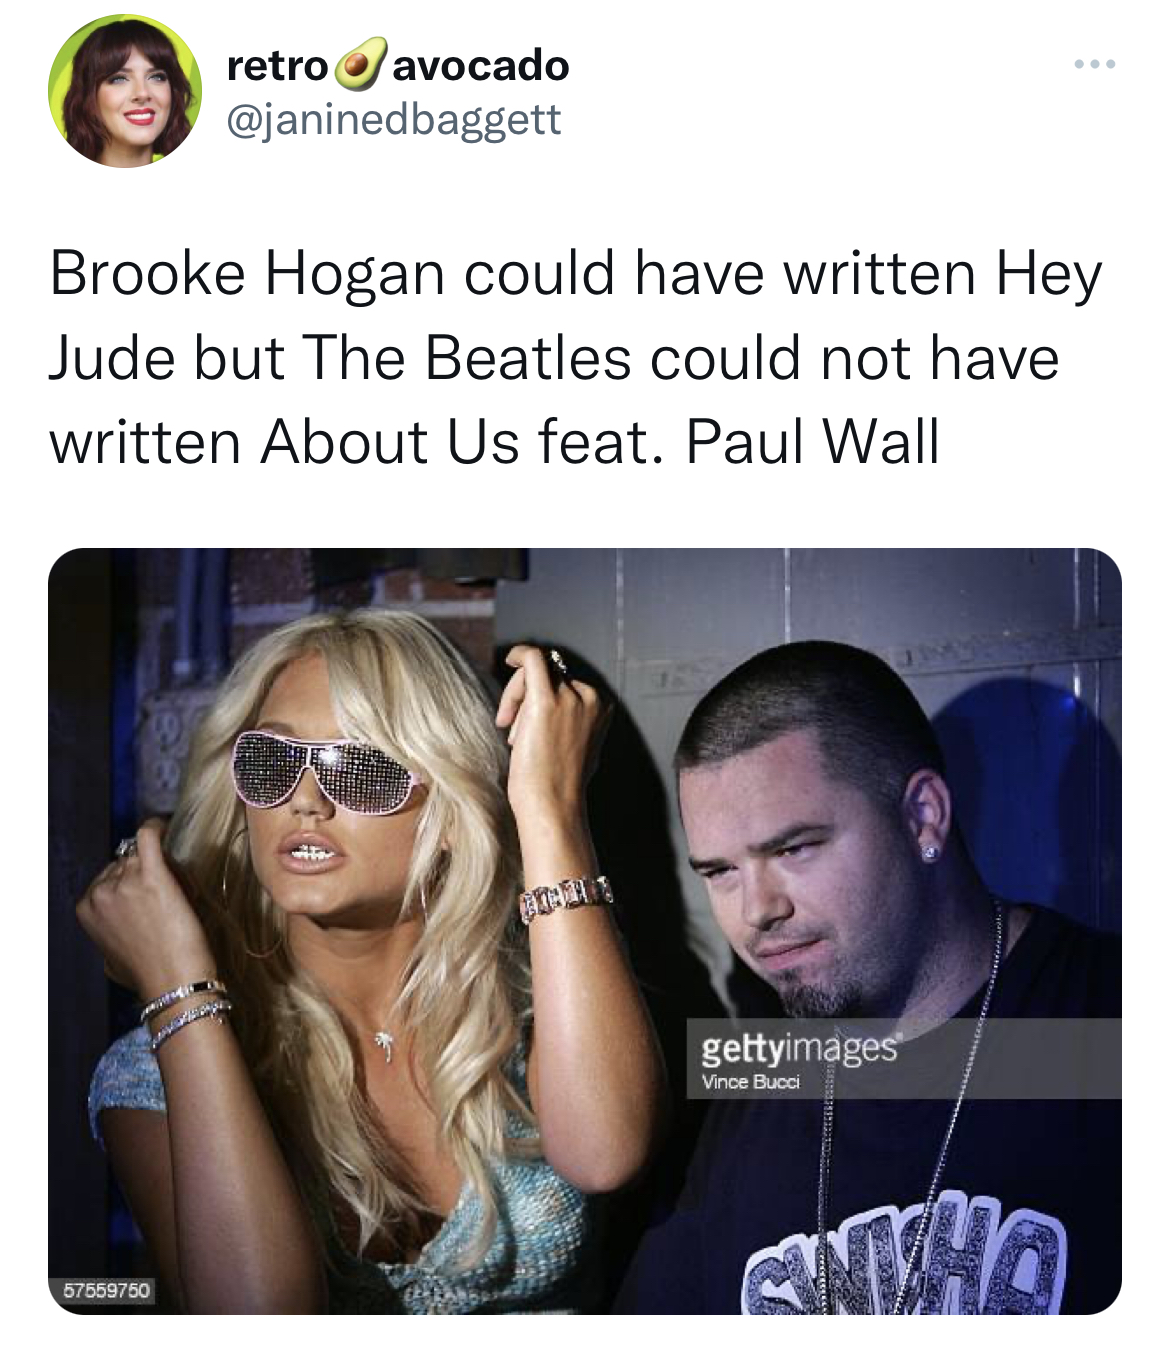 celeb roasts of the week - photo caption - retroavocado Brooke Hogan could have written Hey Jude but The Beatles could not have written About Us feat. Paul Wall 67569750 gettyimages Vin Buod Antho